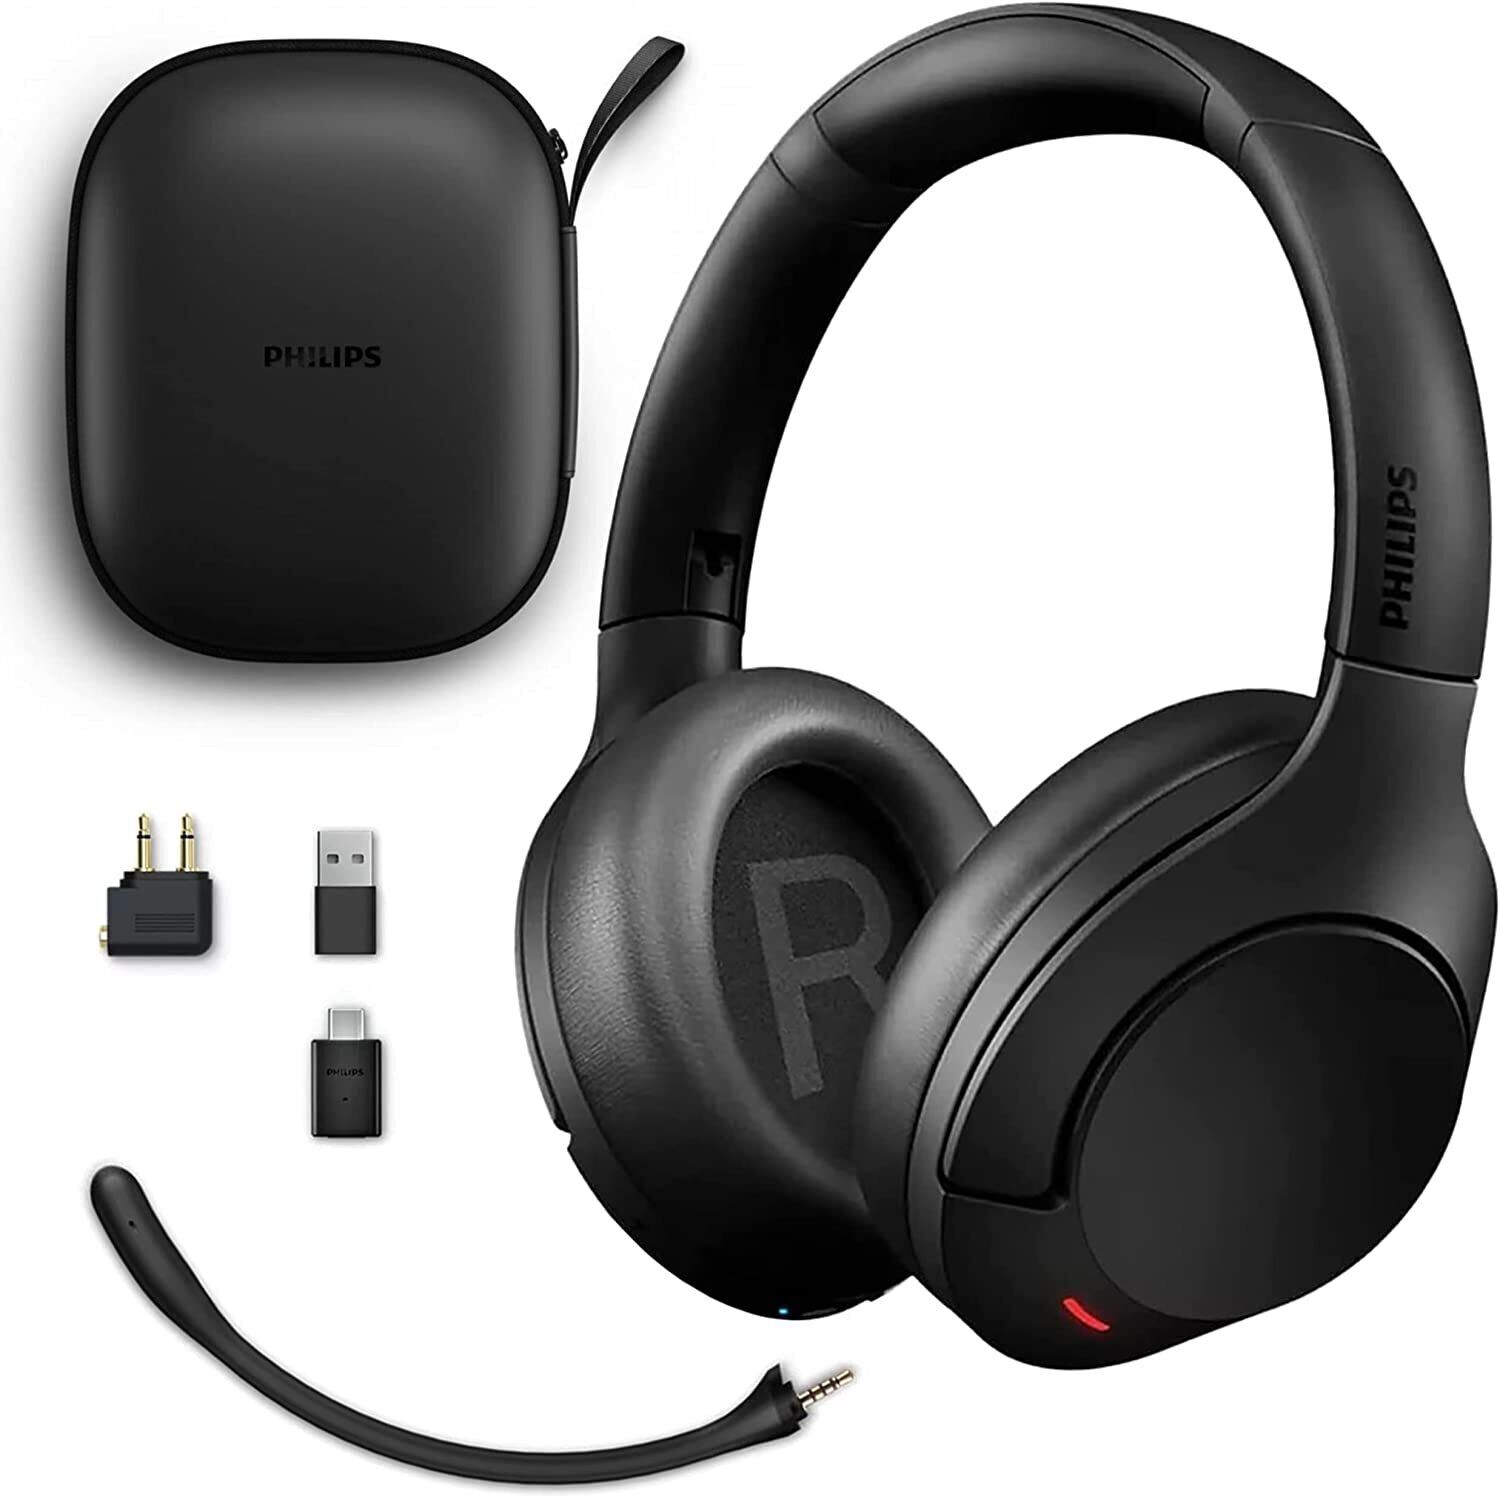 Philips Stereo Wireless Headphones. Noise Cancelling. Bluetooth + Removable Mic